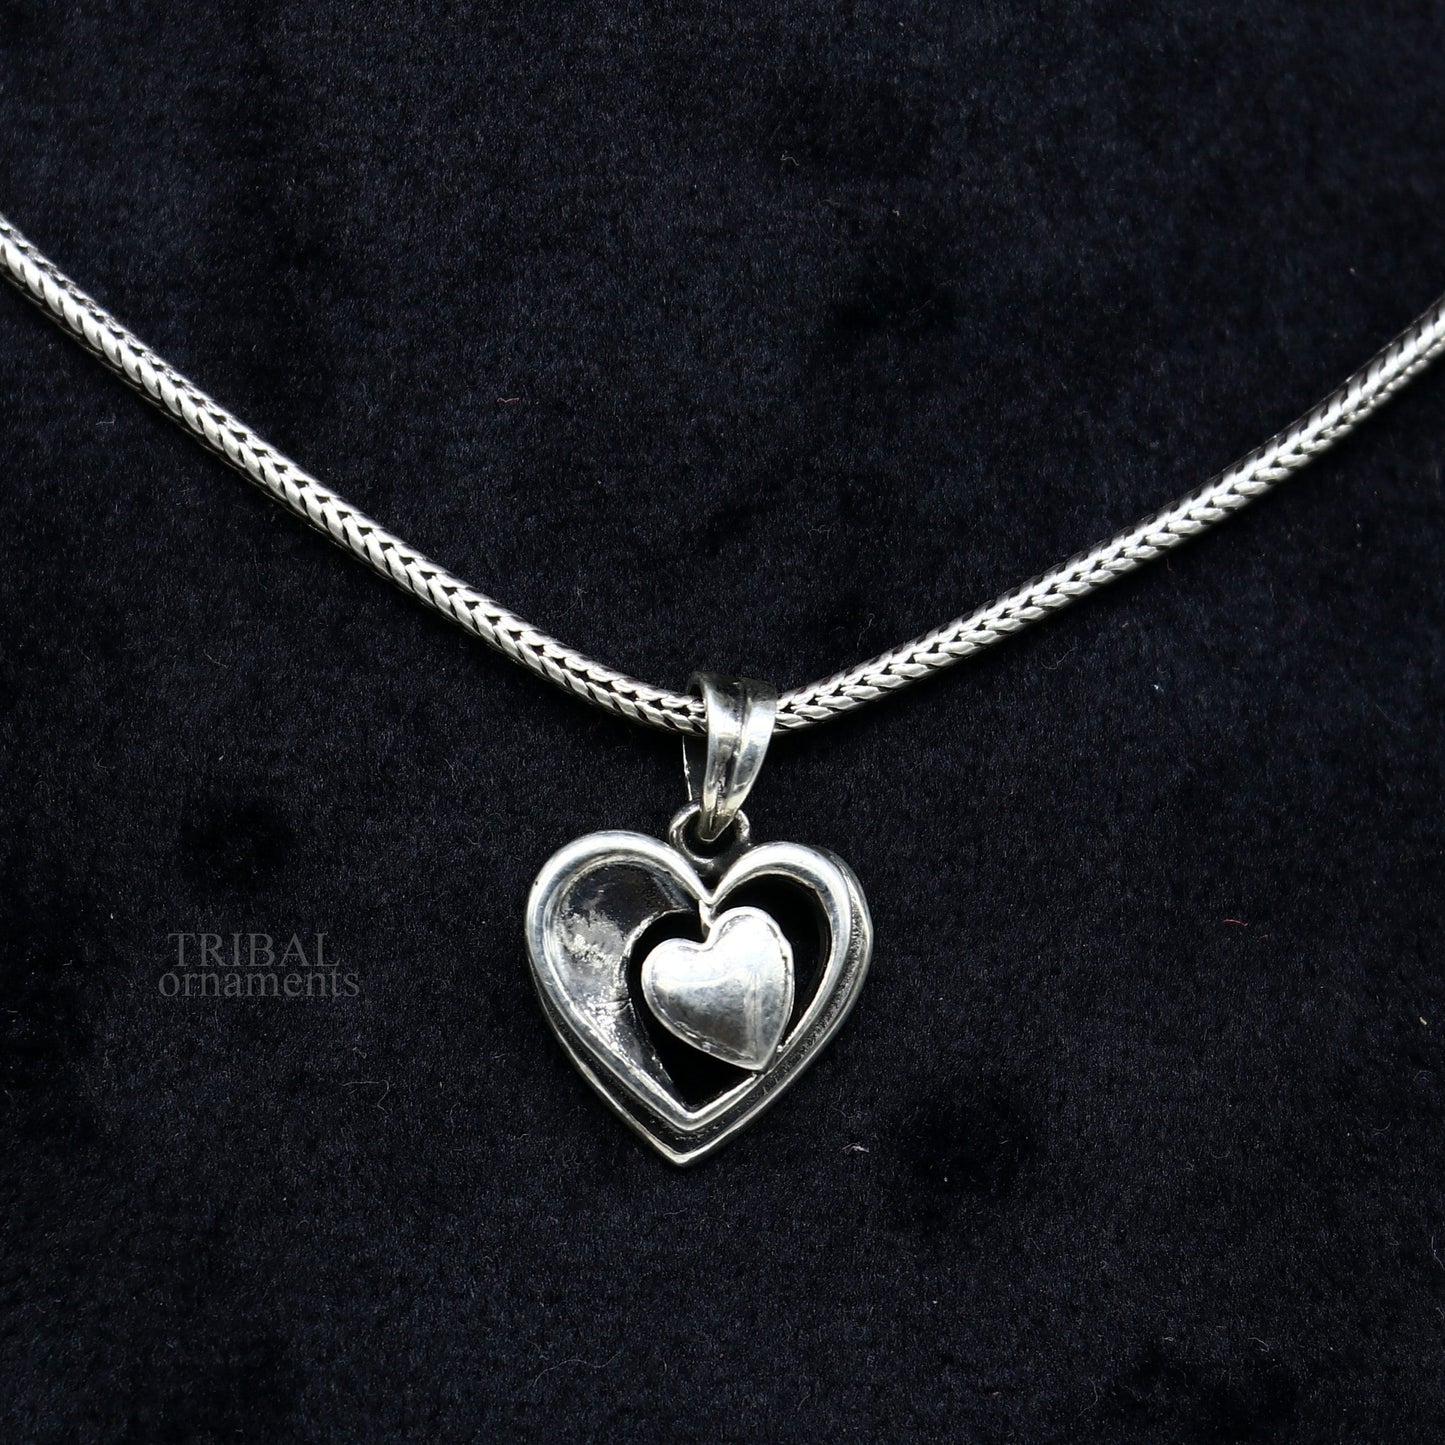 Exclusive design solid 925 sterling silver heart pendant, excellent unique design stylish unisex personalized gift pendant jewelry ssp1433 - TRIBAL ORNAMENTS